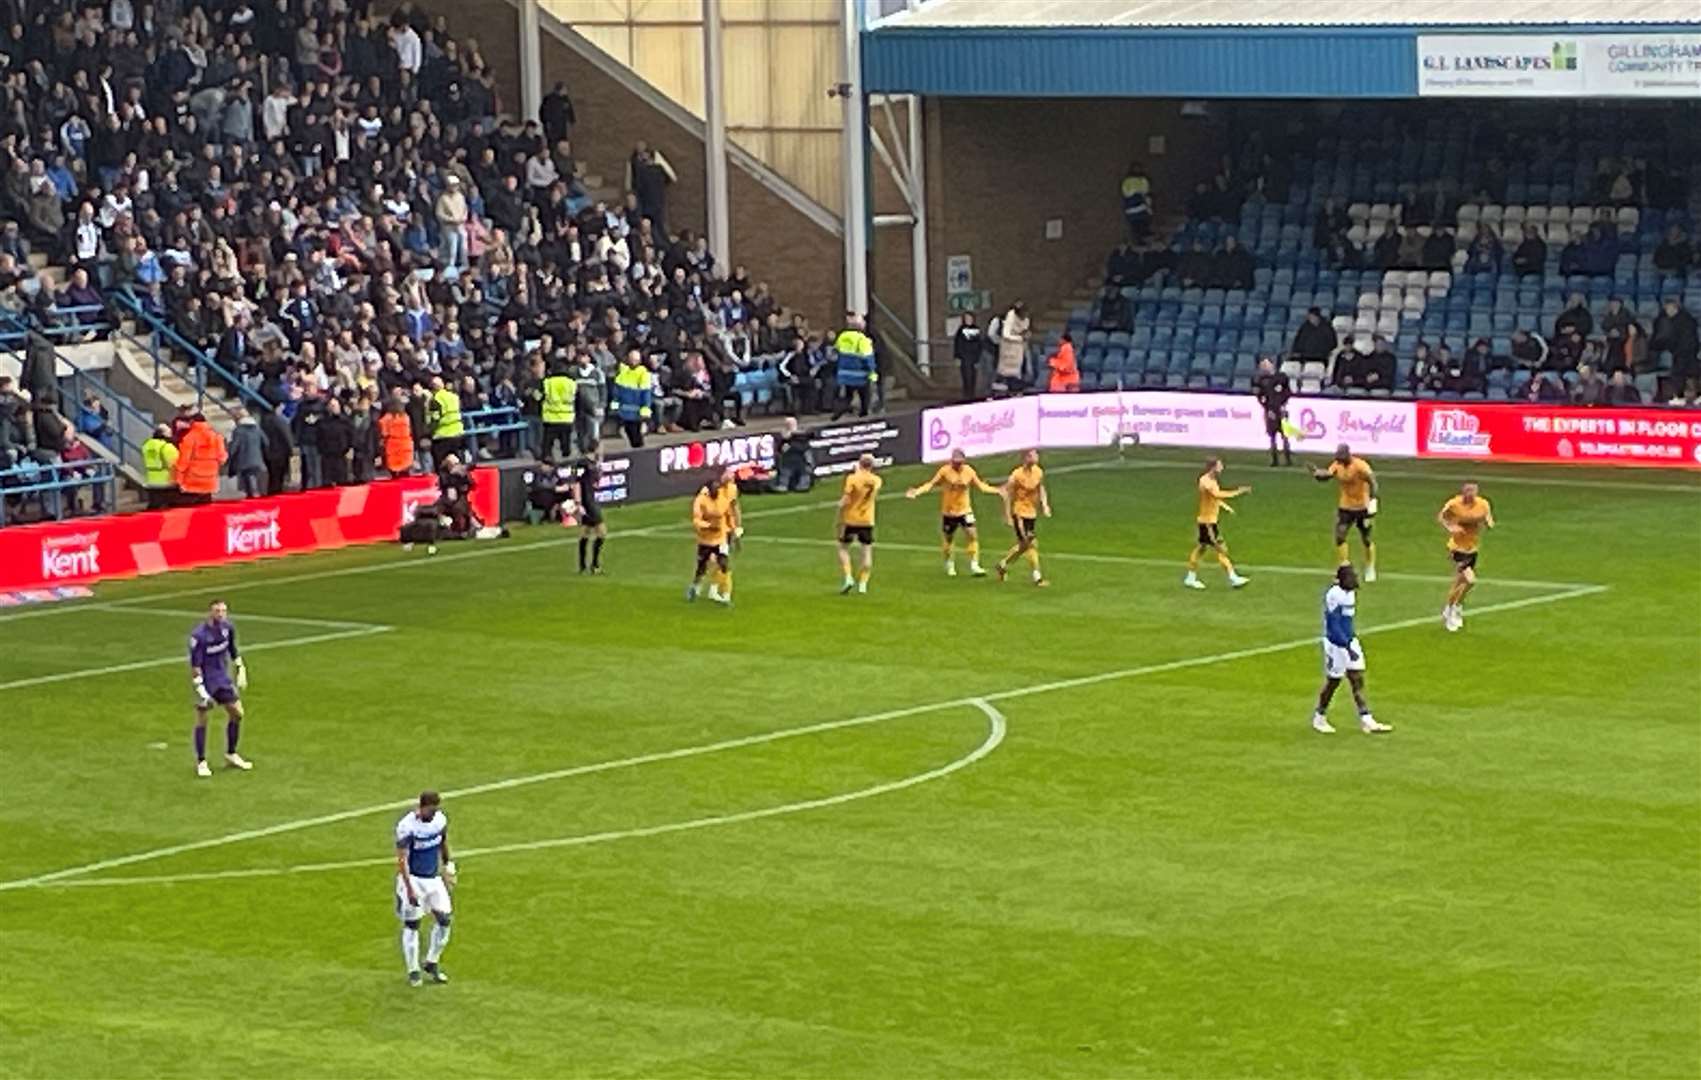 Trouble at Priestfield afer Omar Bogle scored his first penalty for Newport